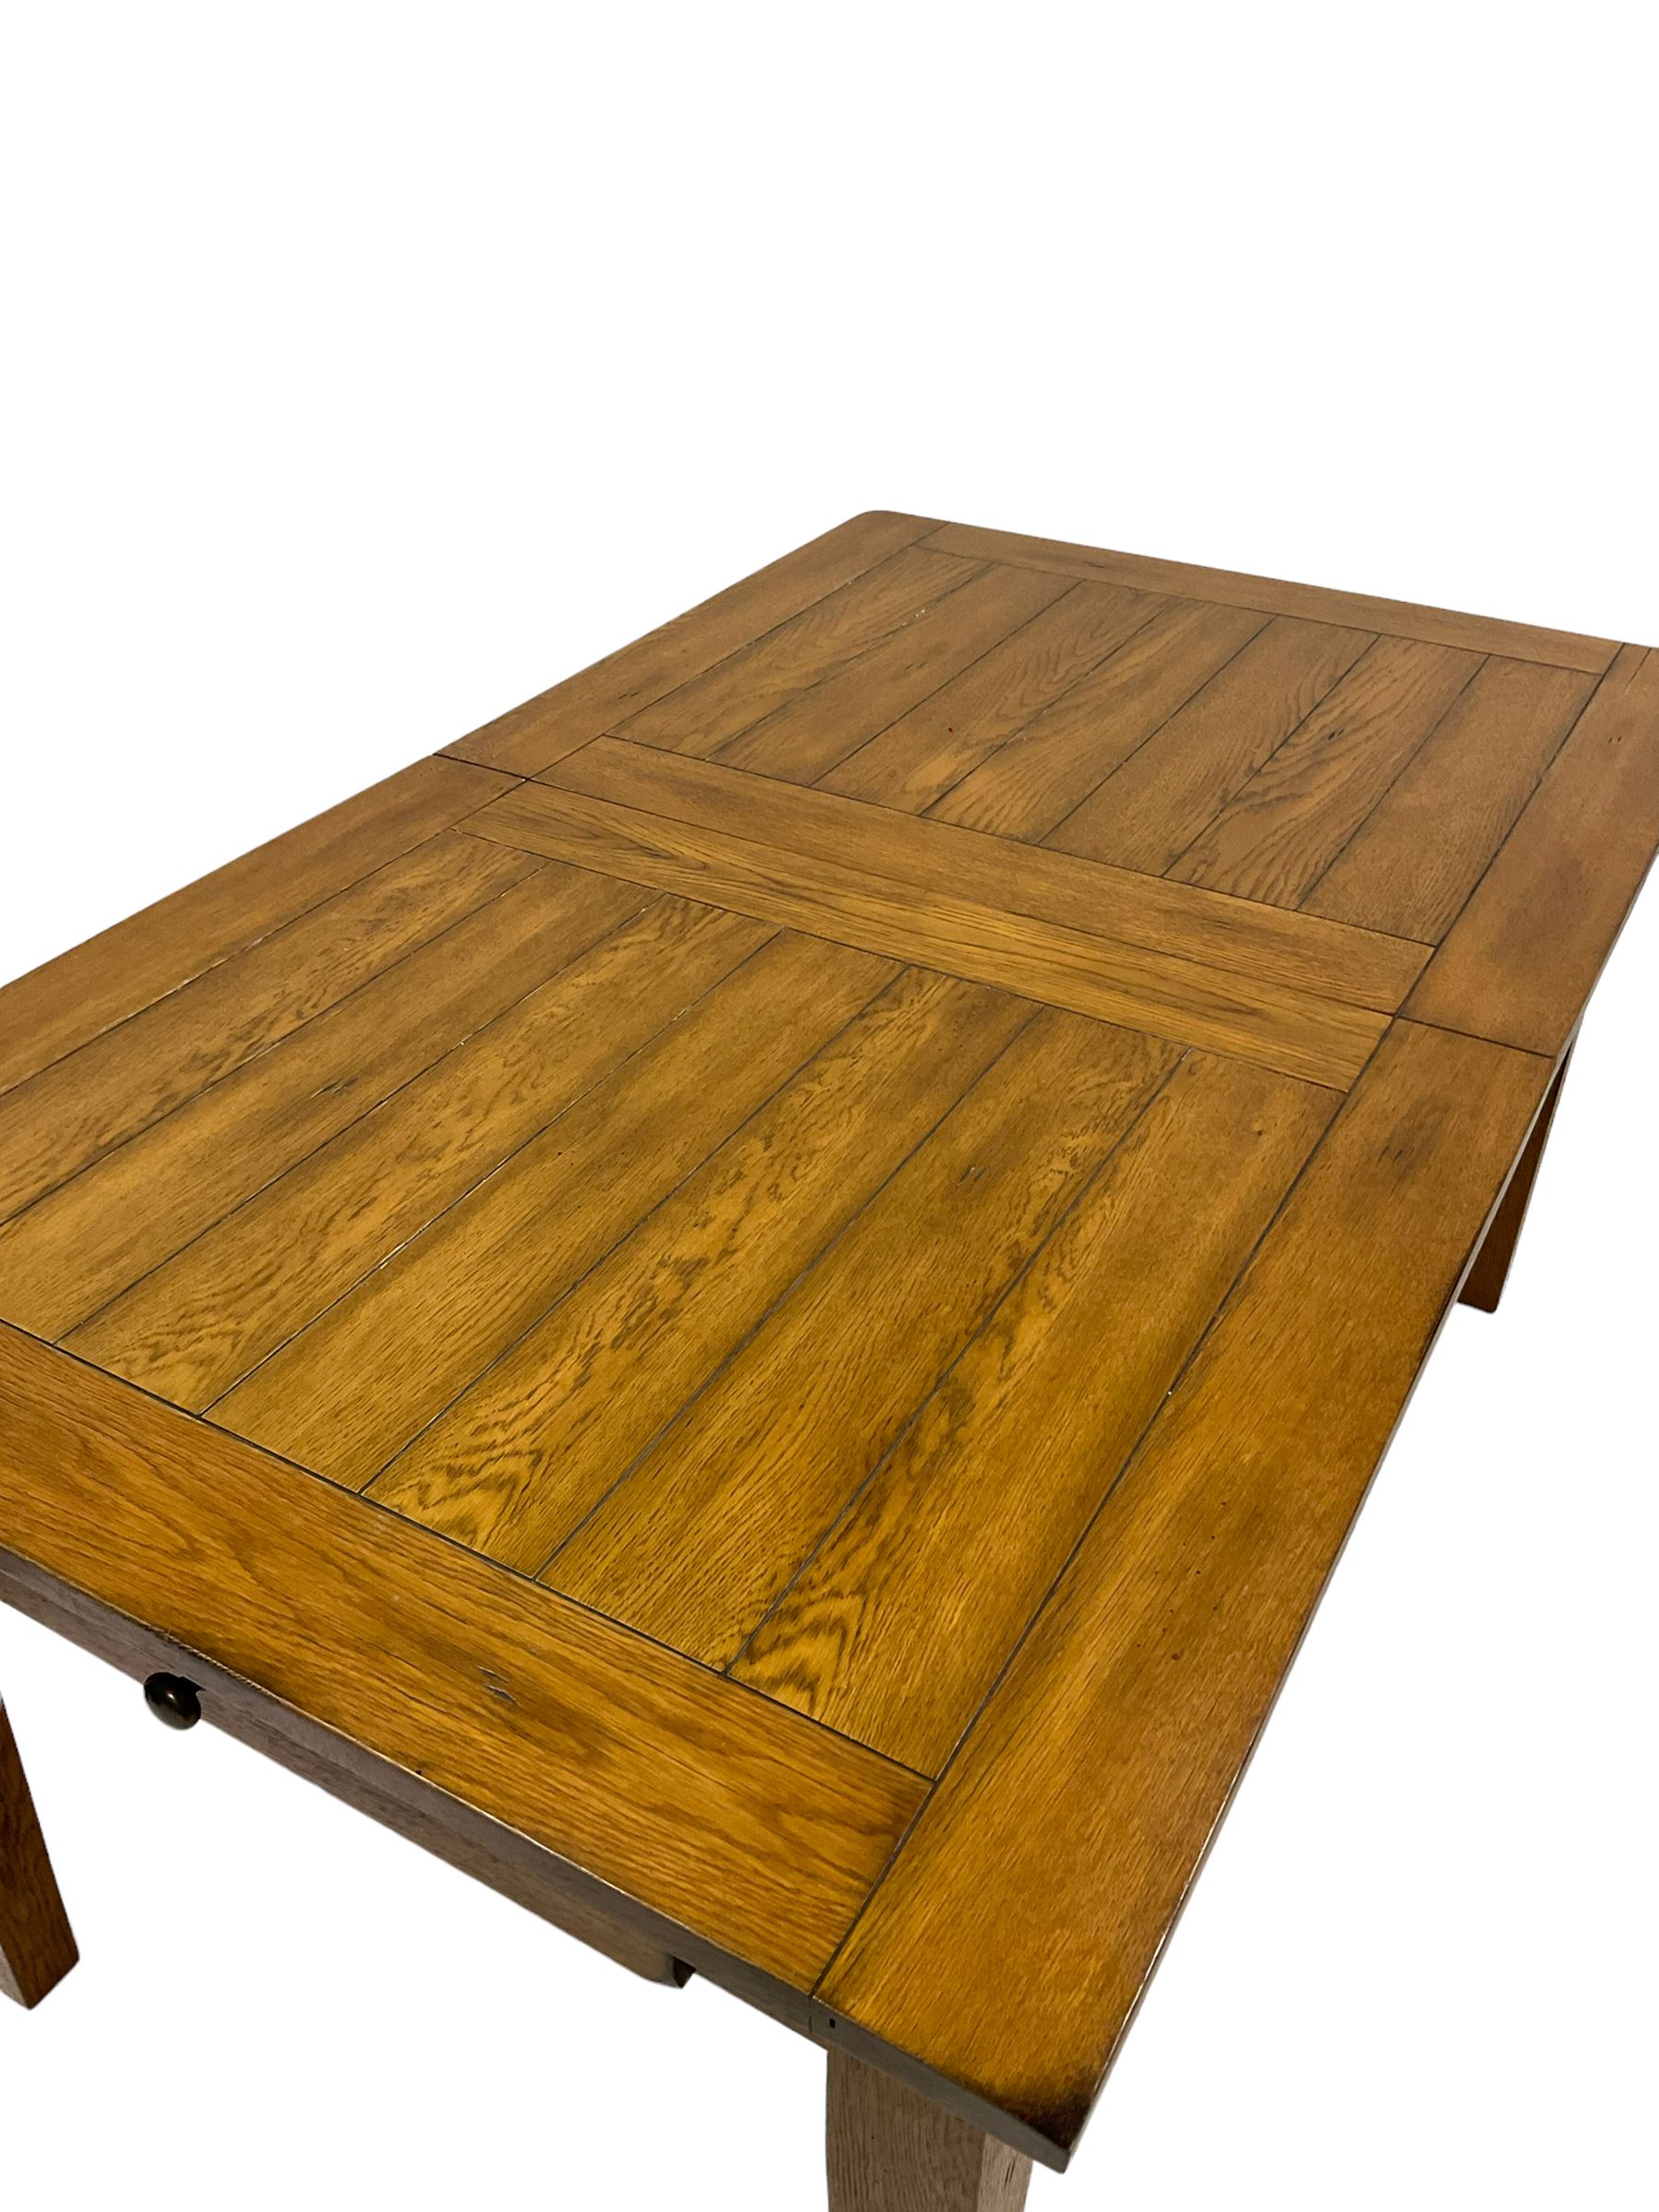 Oak dining table - Image 5 of 5